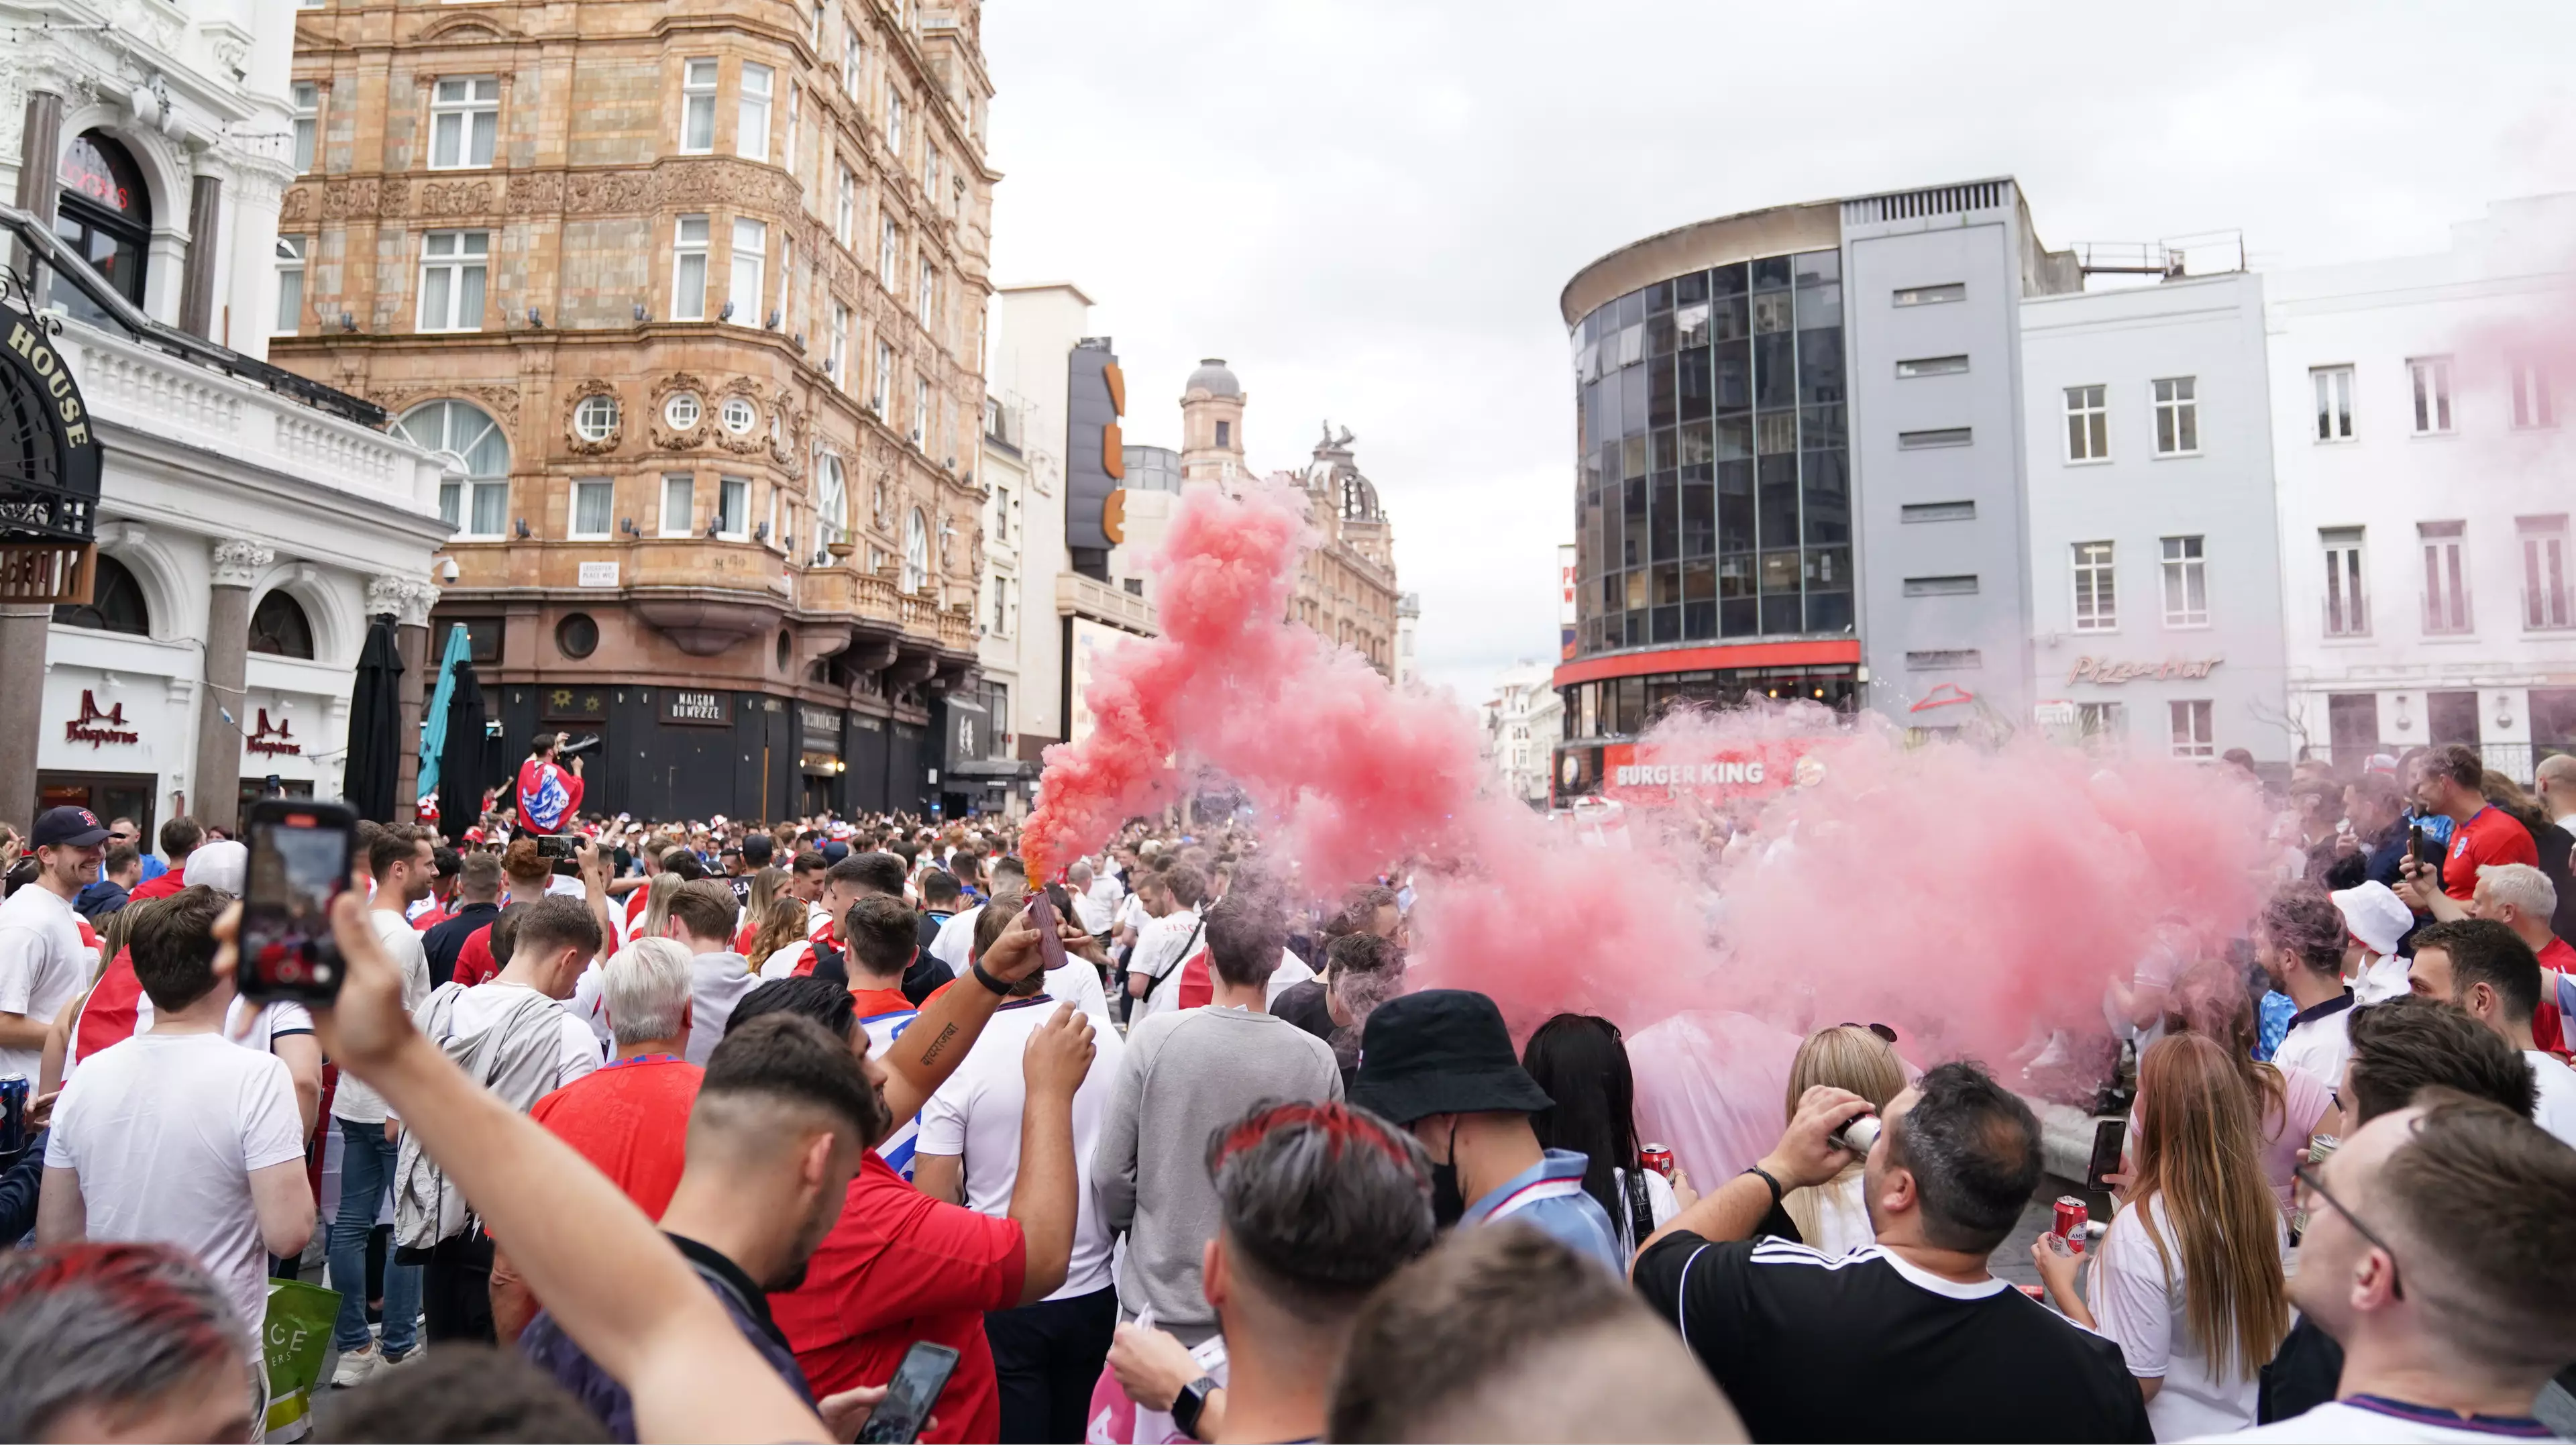 London Thrown Into Chaos As England Fans Gather Ahead Of Final